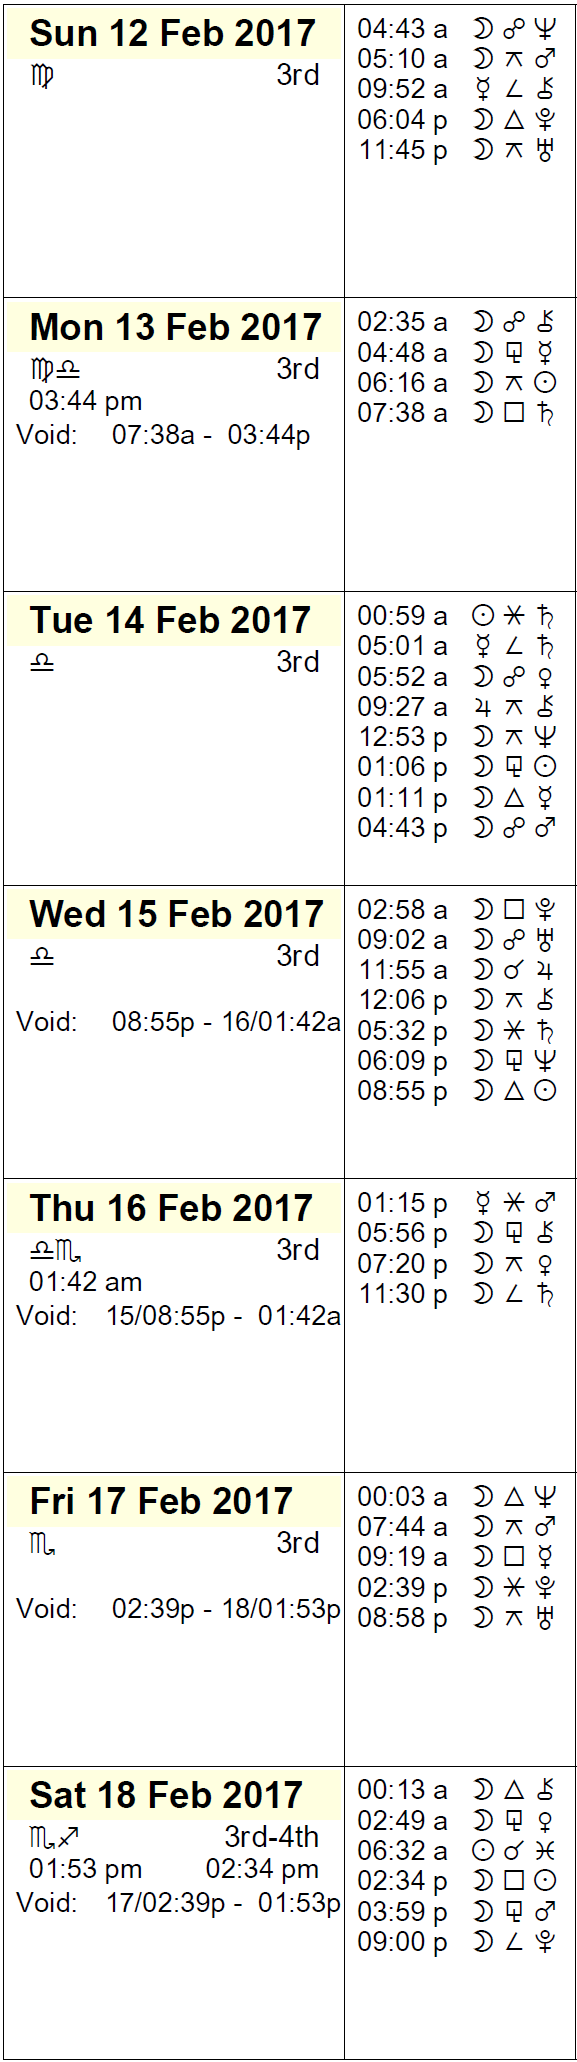 This Week in Astrology Calendar - February 12 to 18, 2017